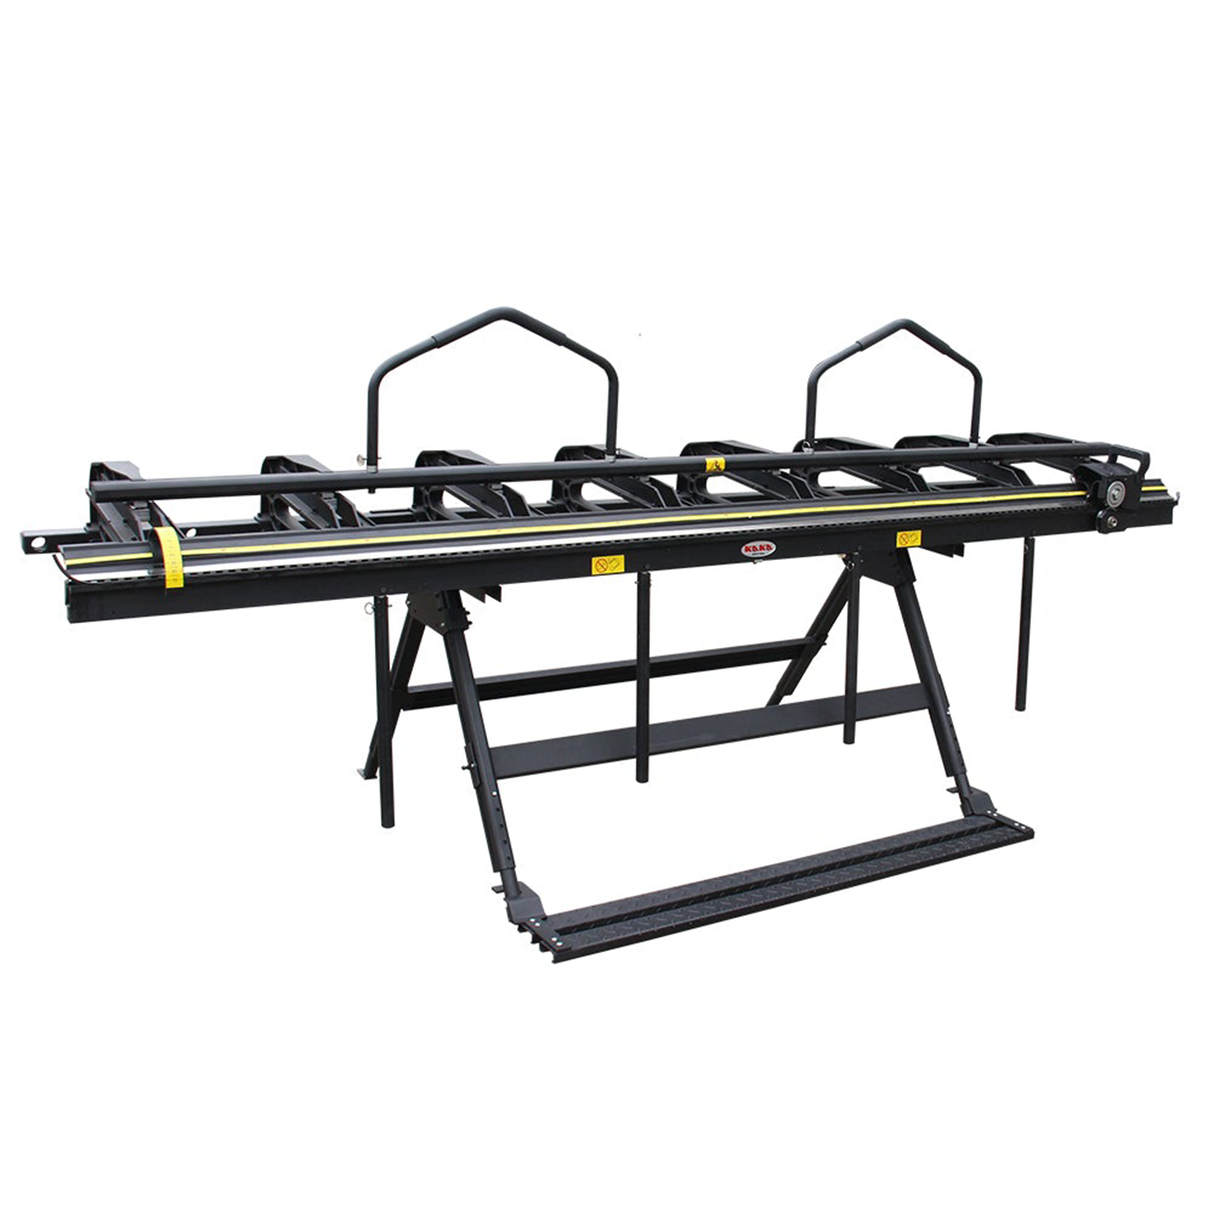 KANG Industrial ALB-102 Portable Thin Plate Bending Brake, 2600mm Width, With a Roller Knife to Cut Sheet